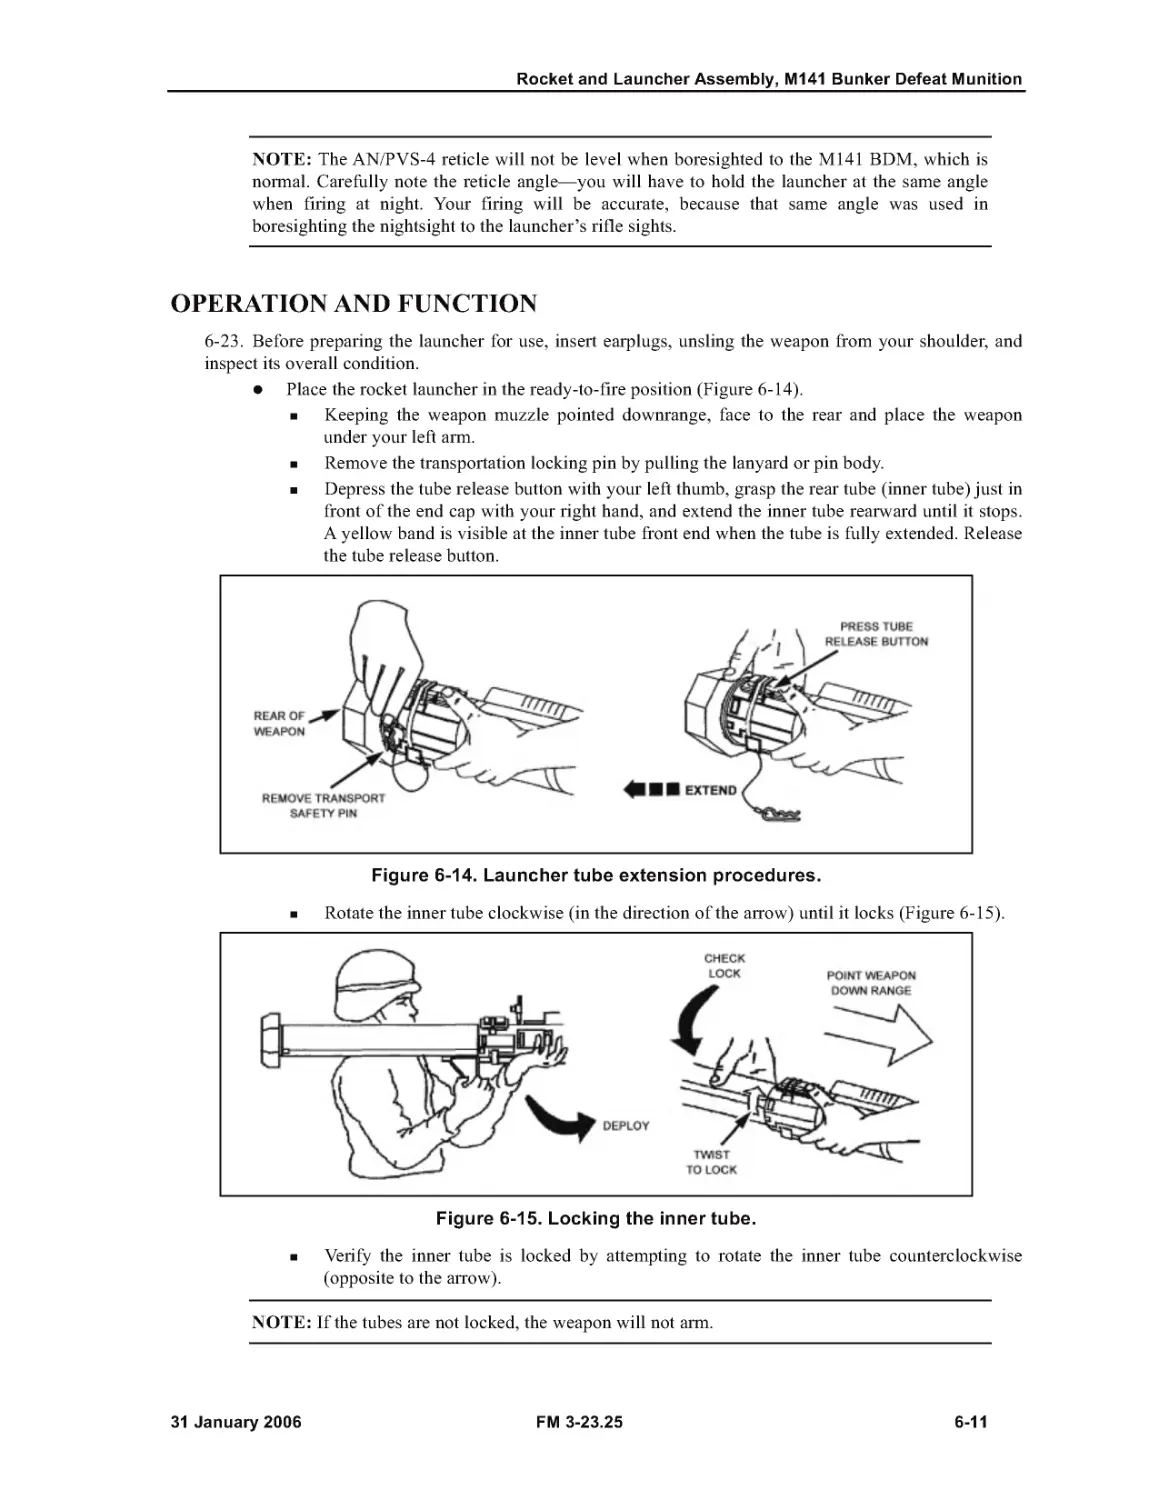 Figure 6-14. Launcher tube extension procedures.
Figure 6-15. Locking the inner tube.
OPERATION AND FUNCTION